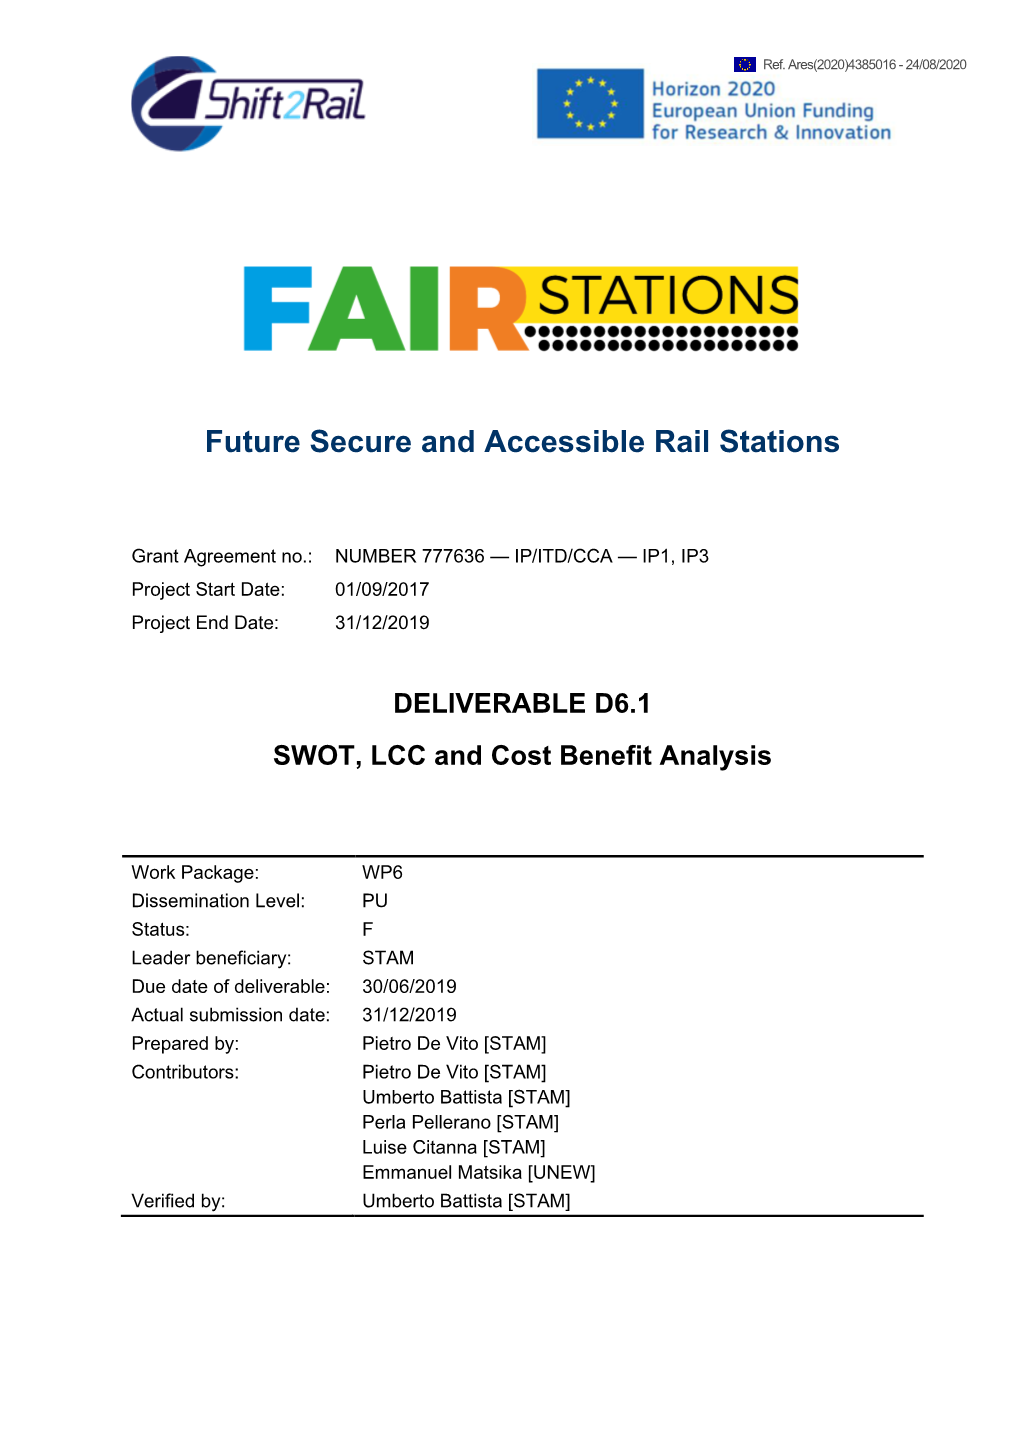 Future Secure and Accessible Rail Stations